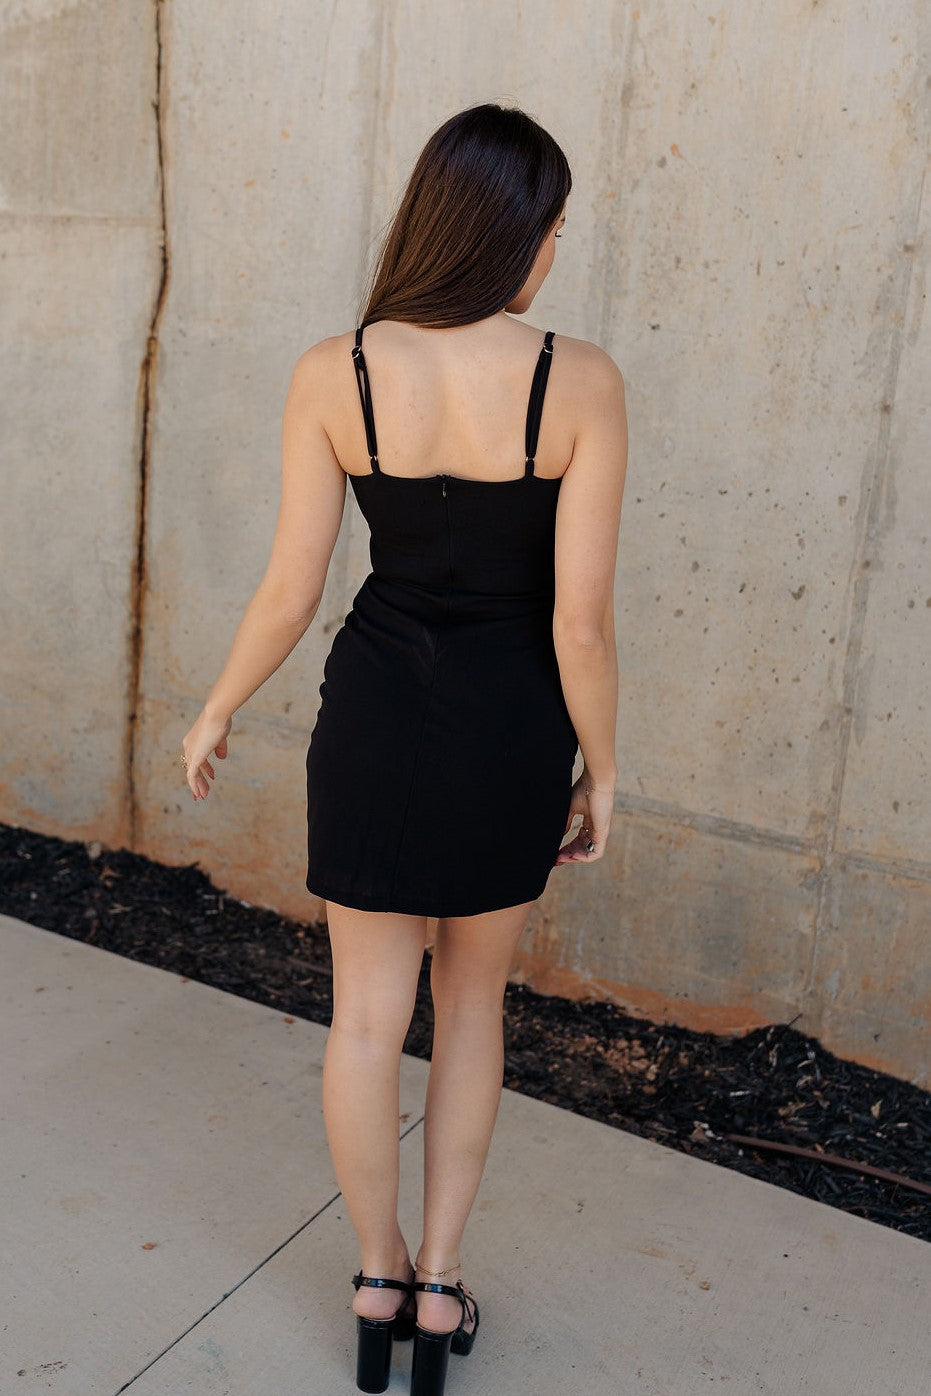 Full body back view of the model wearing the Elodie Black Rhinestone Bow Mini Dress that has black knit fabric, black lining, mini length, scooped neckline, adjustable straps, removable rhinestone bows, sleeveless and monochrome back zipper with hook closure.